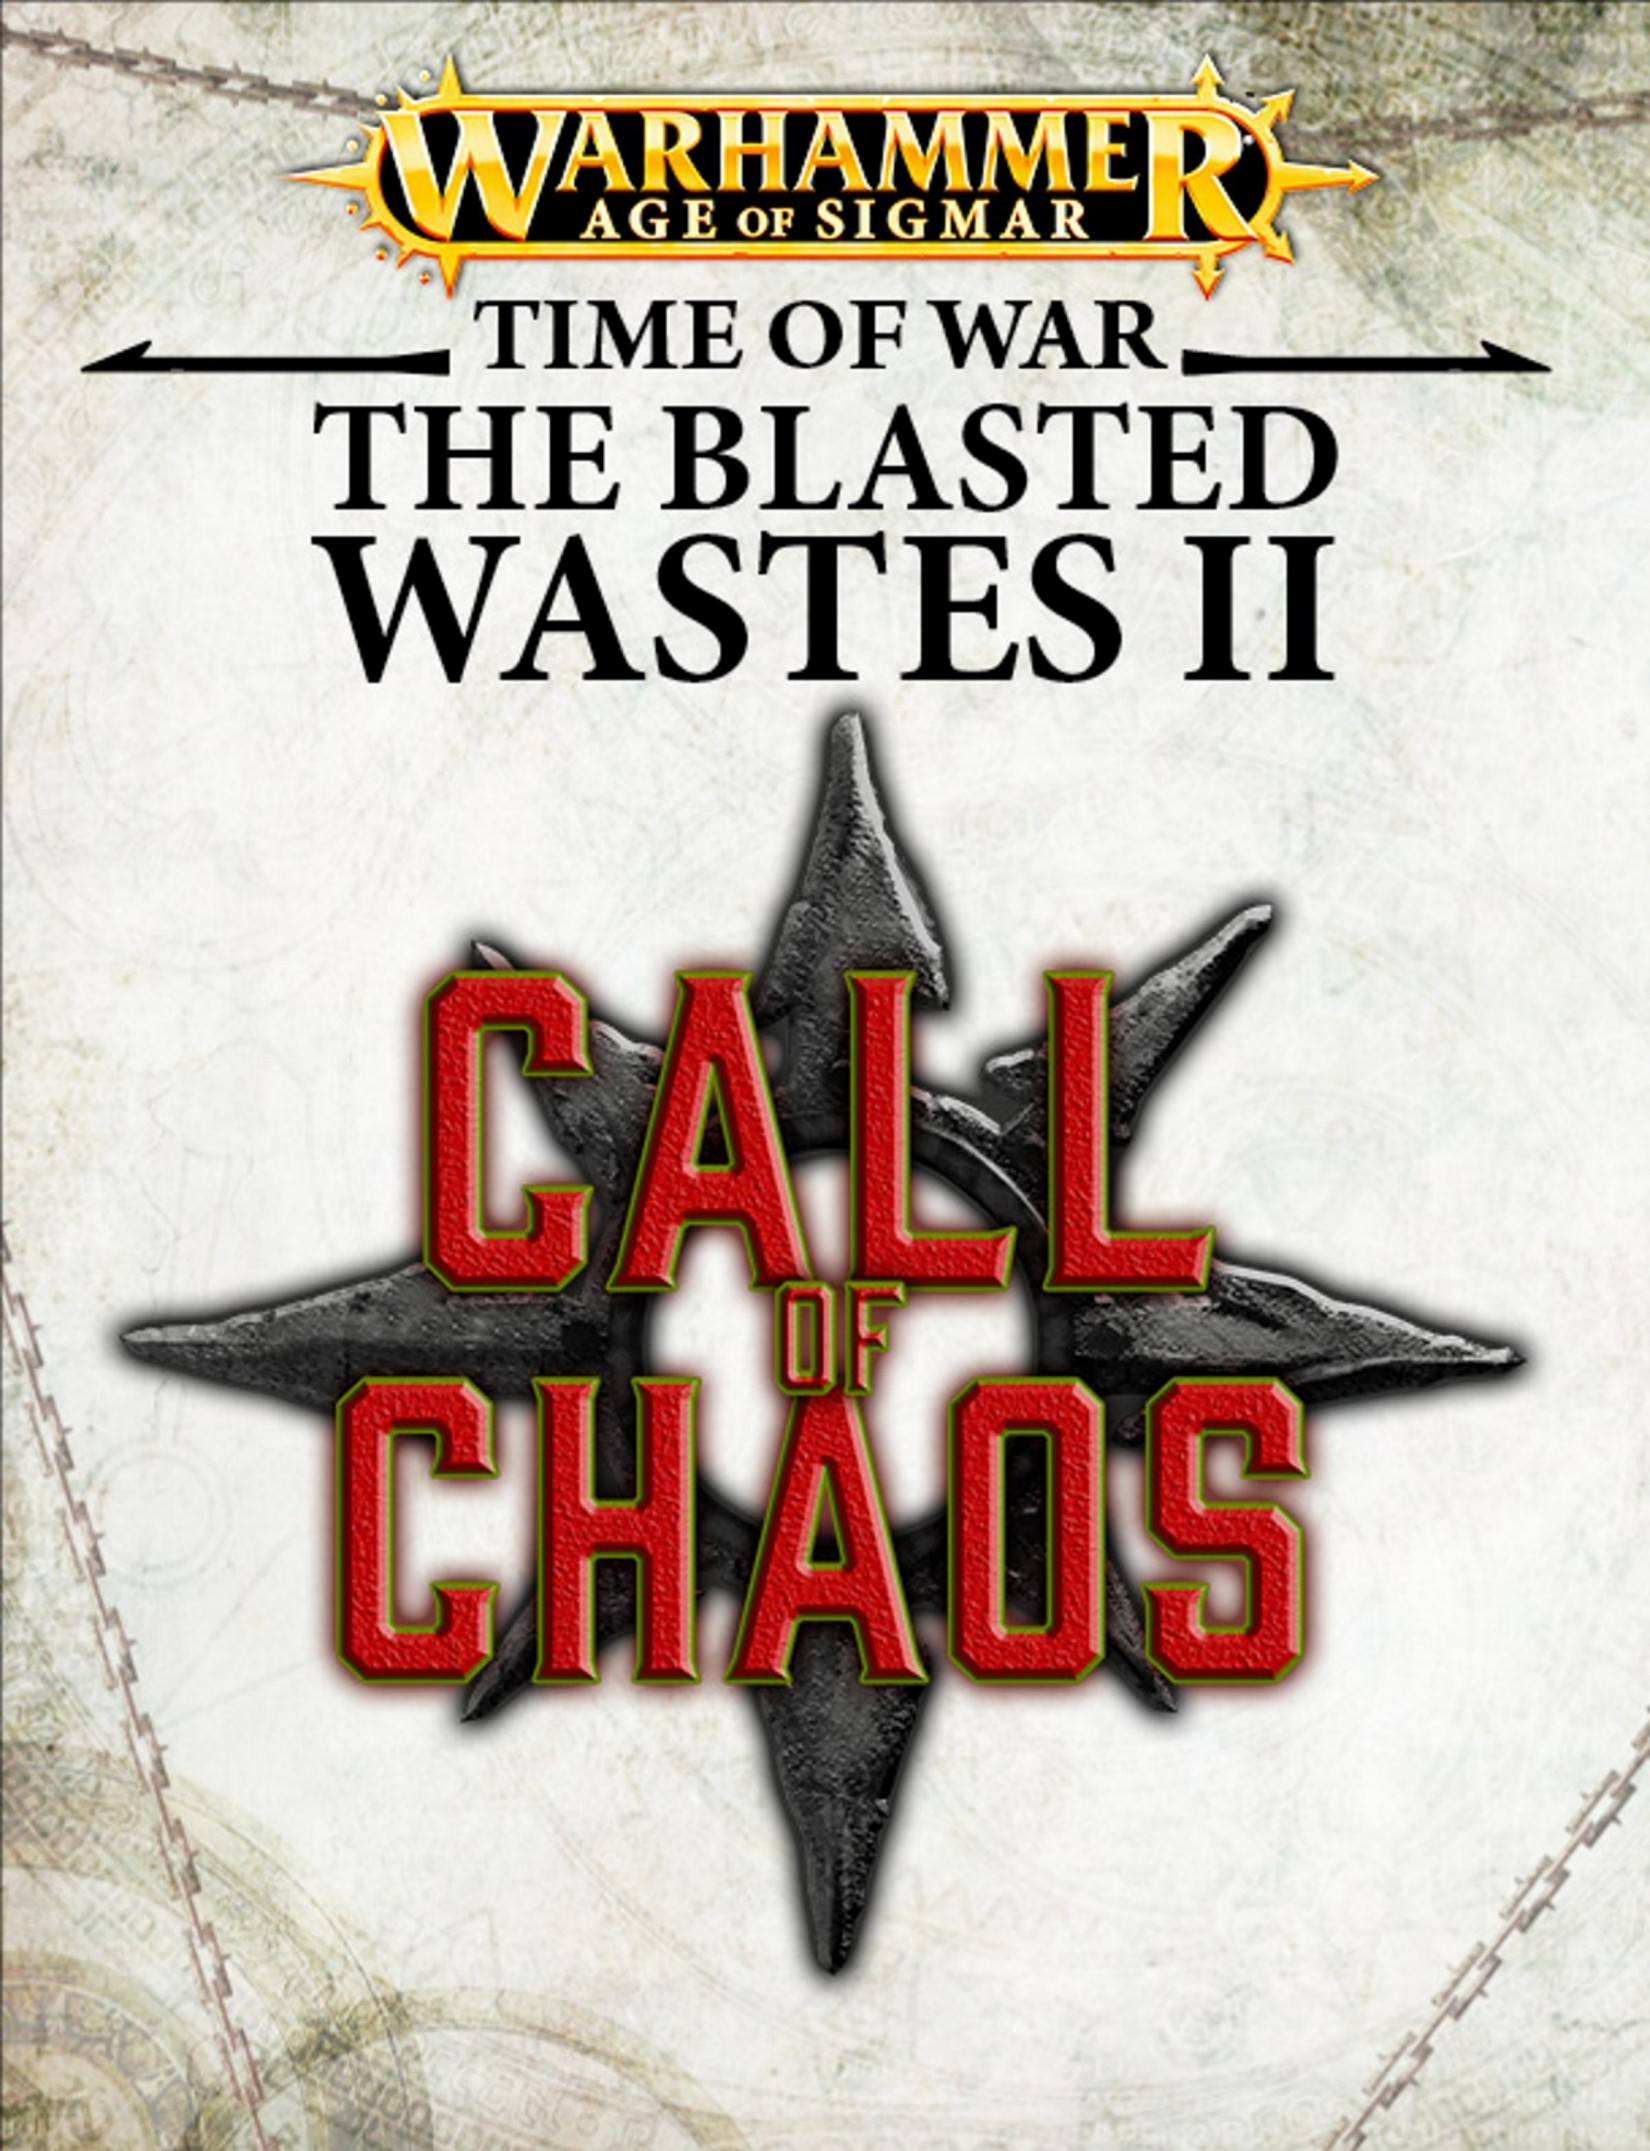 Warhammer: Age of Sigmar - Time of War - The Blasted Wastes II